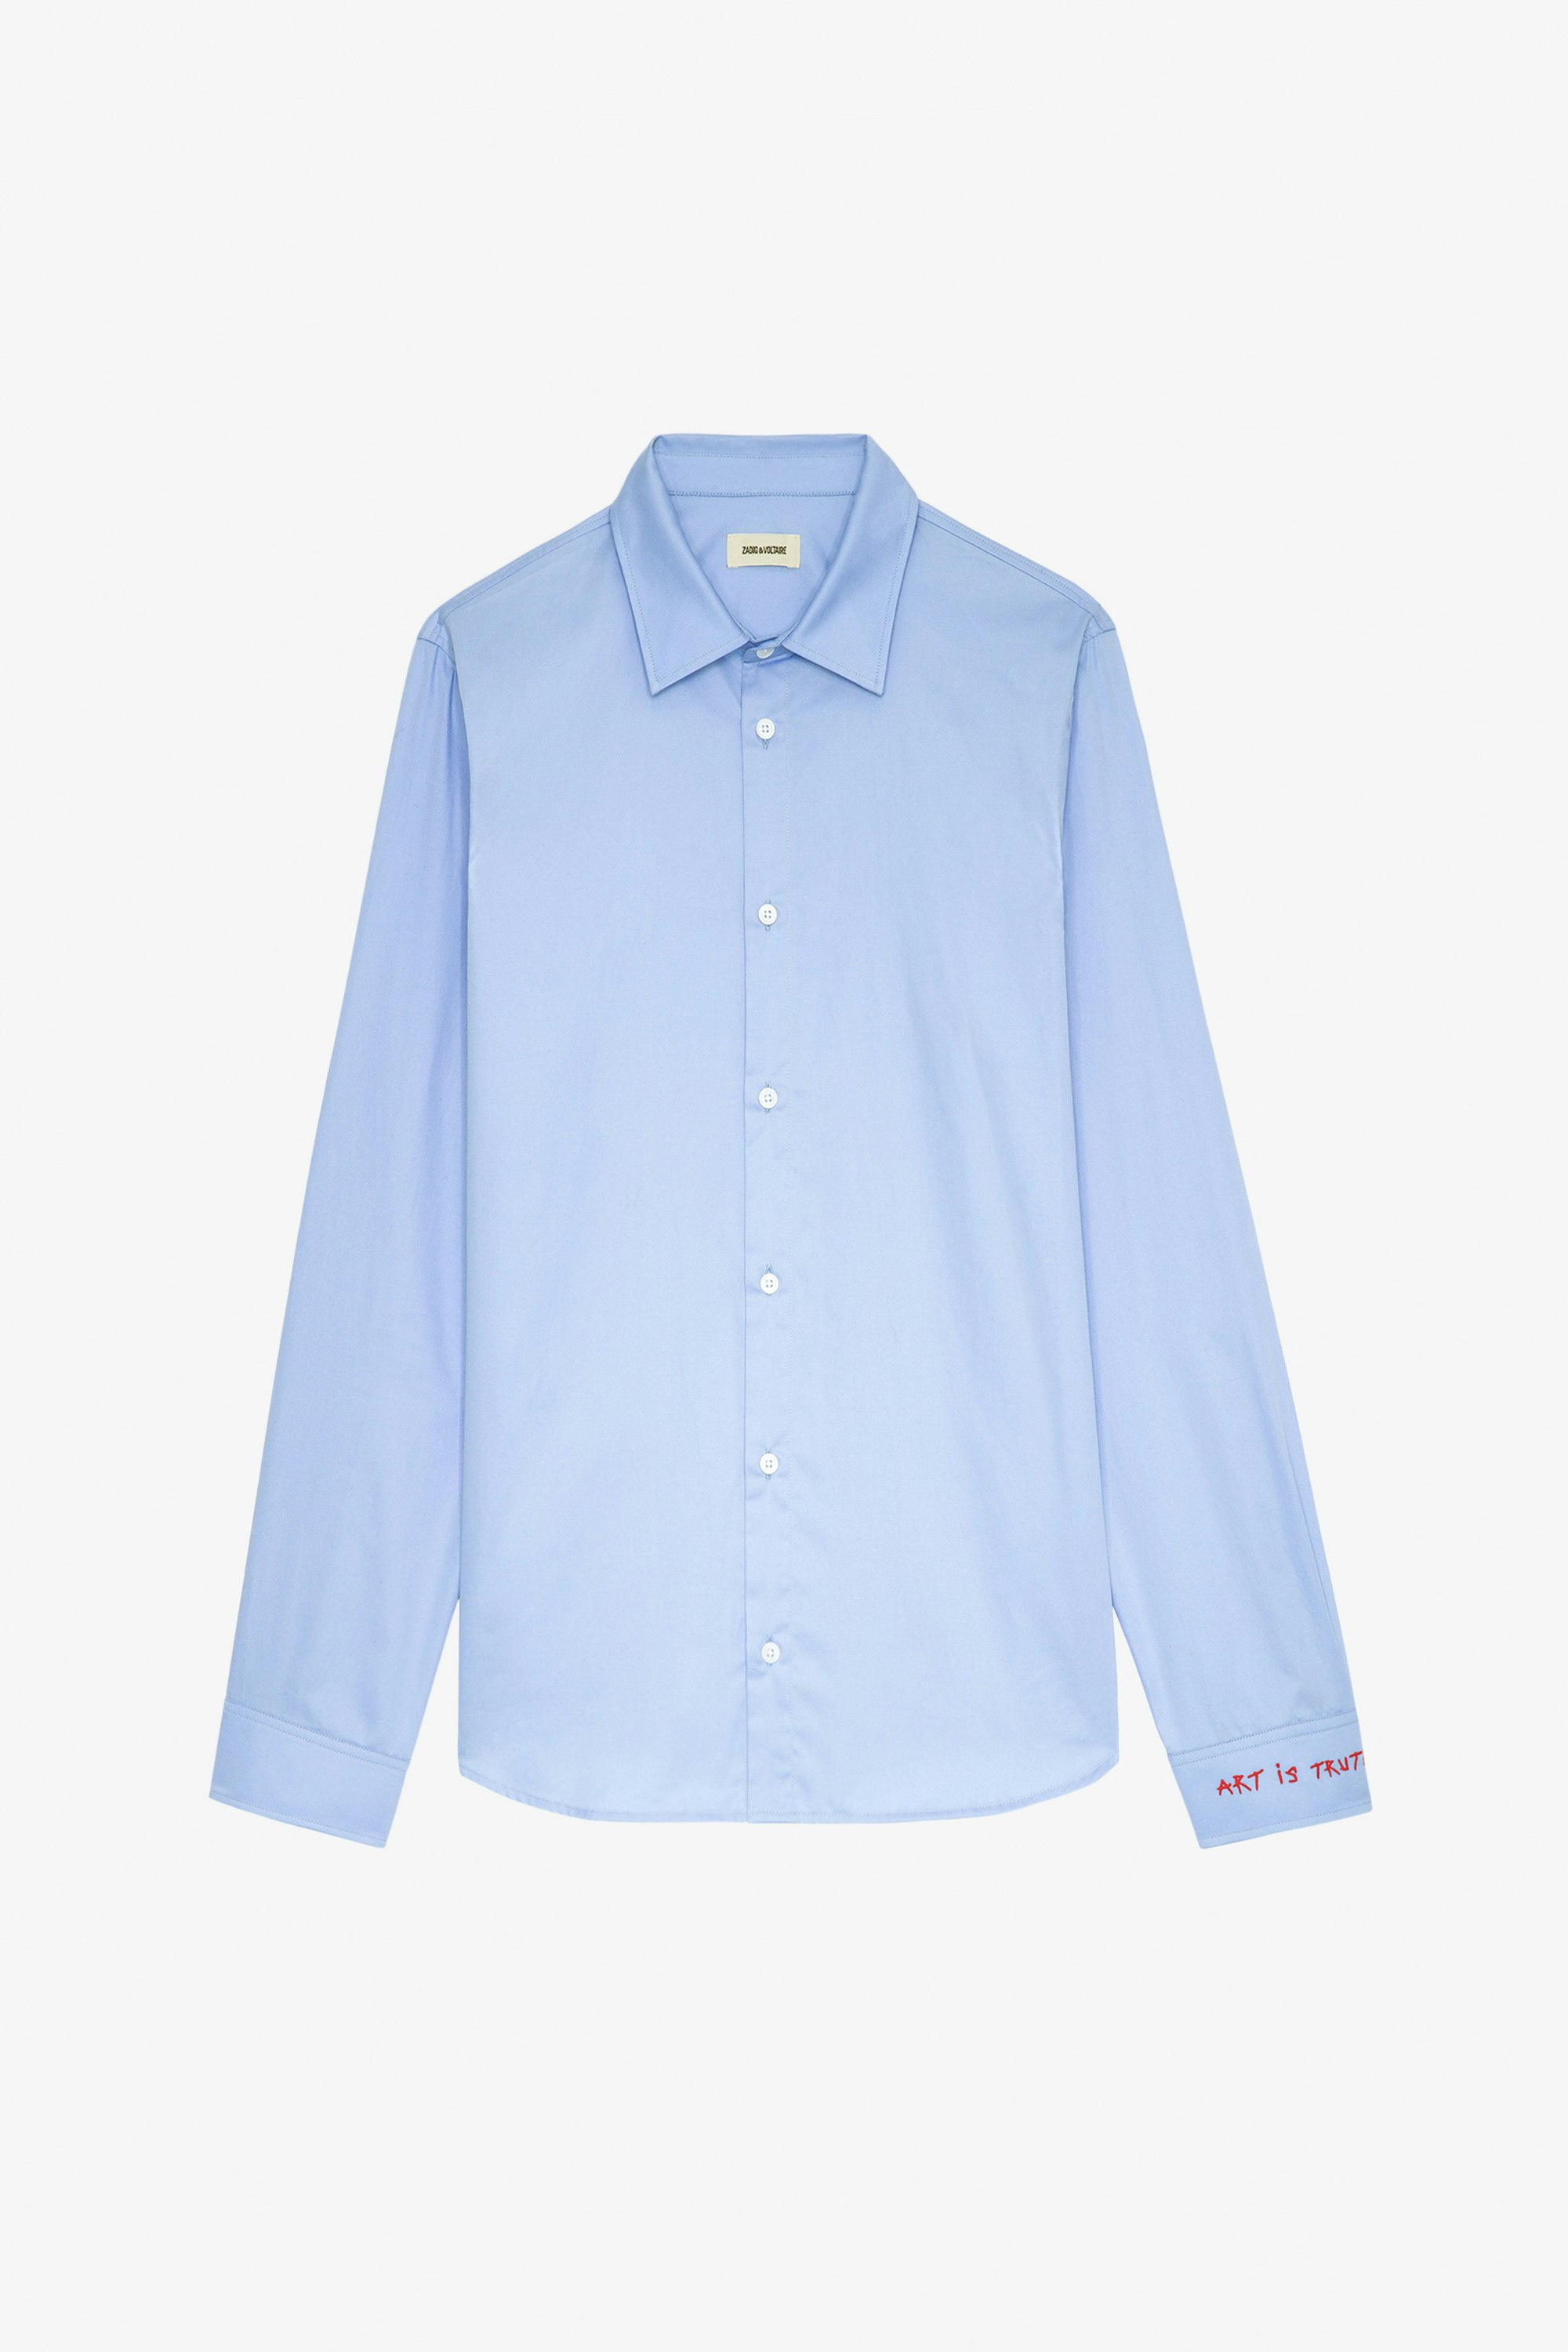 Sydney Shirt - Unisex sky blue cotton shirt with “Art Is Truth” embroidery on the right cuff.